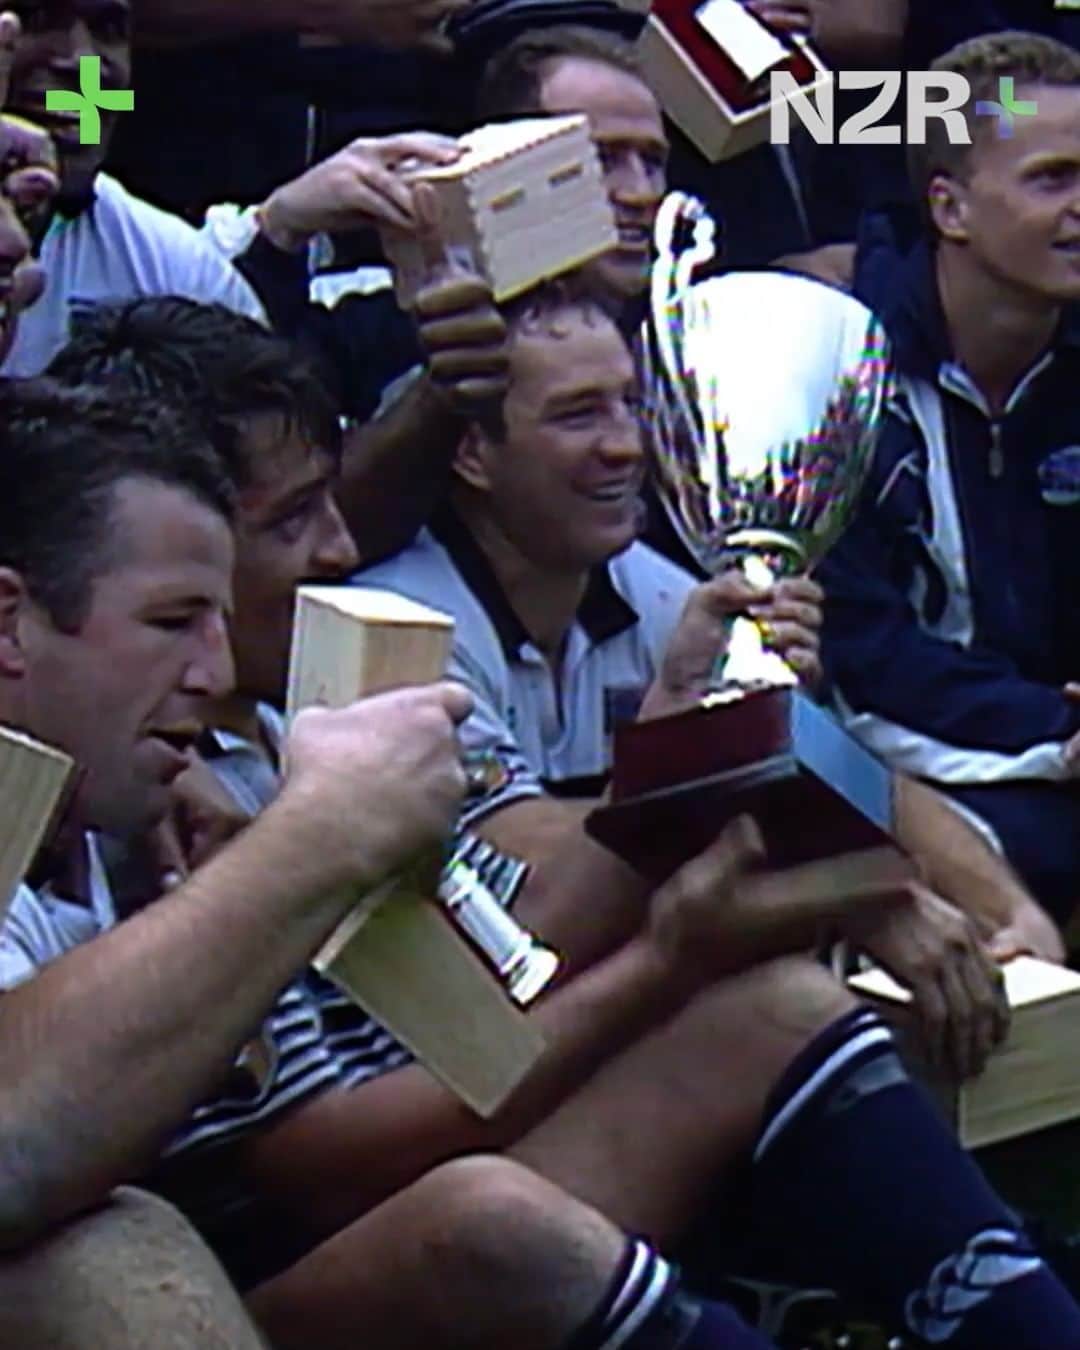 All Blacksのインスタグラム：「Rewind ⏮ 1996 Super Rugby Final: Blues v Sharks  The inaugural Super 12 season in 1996 reached its climax at Eden Park 💪  Watch for free on NZR+ 👉 https://app.nzrplus.com/video/500695?playlistId=17150  #AllBlacks」